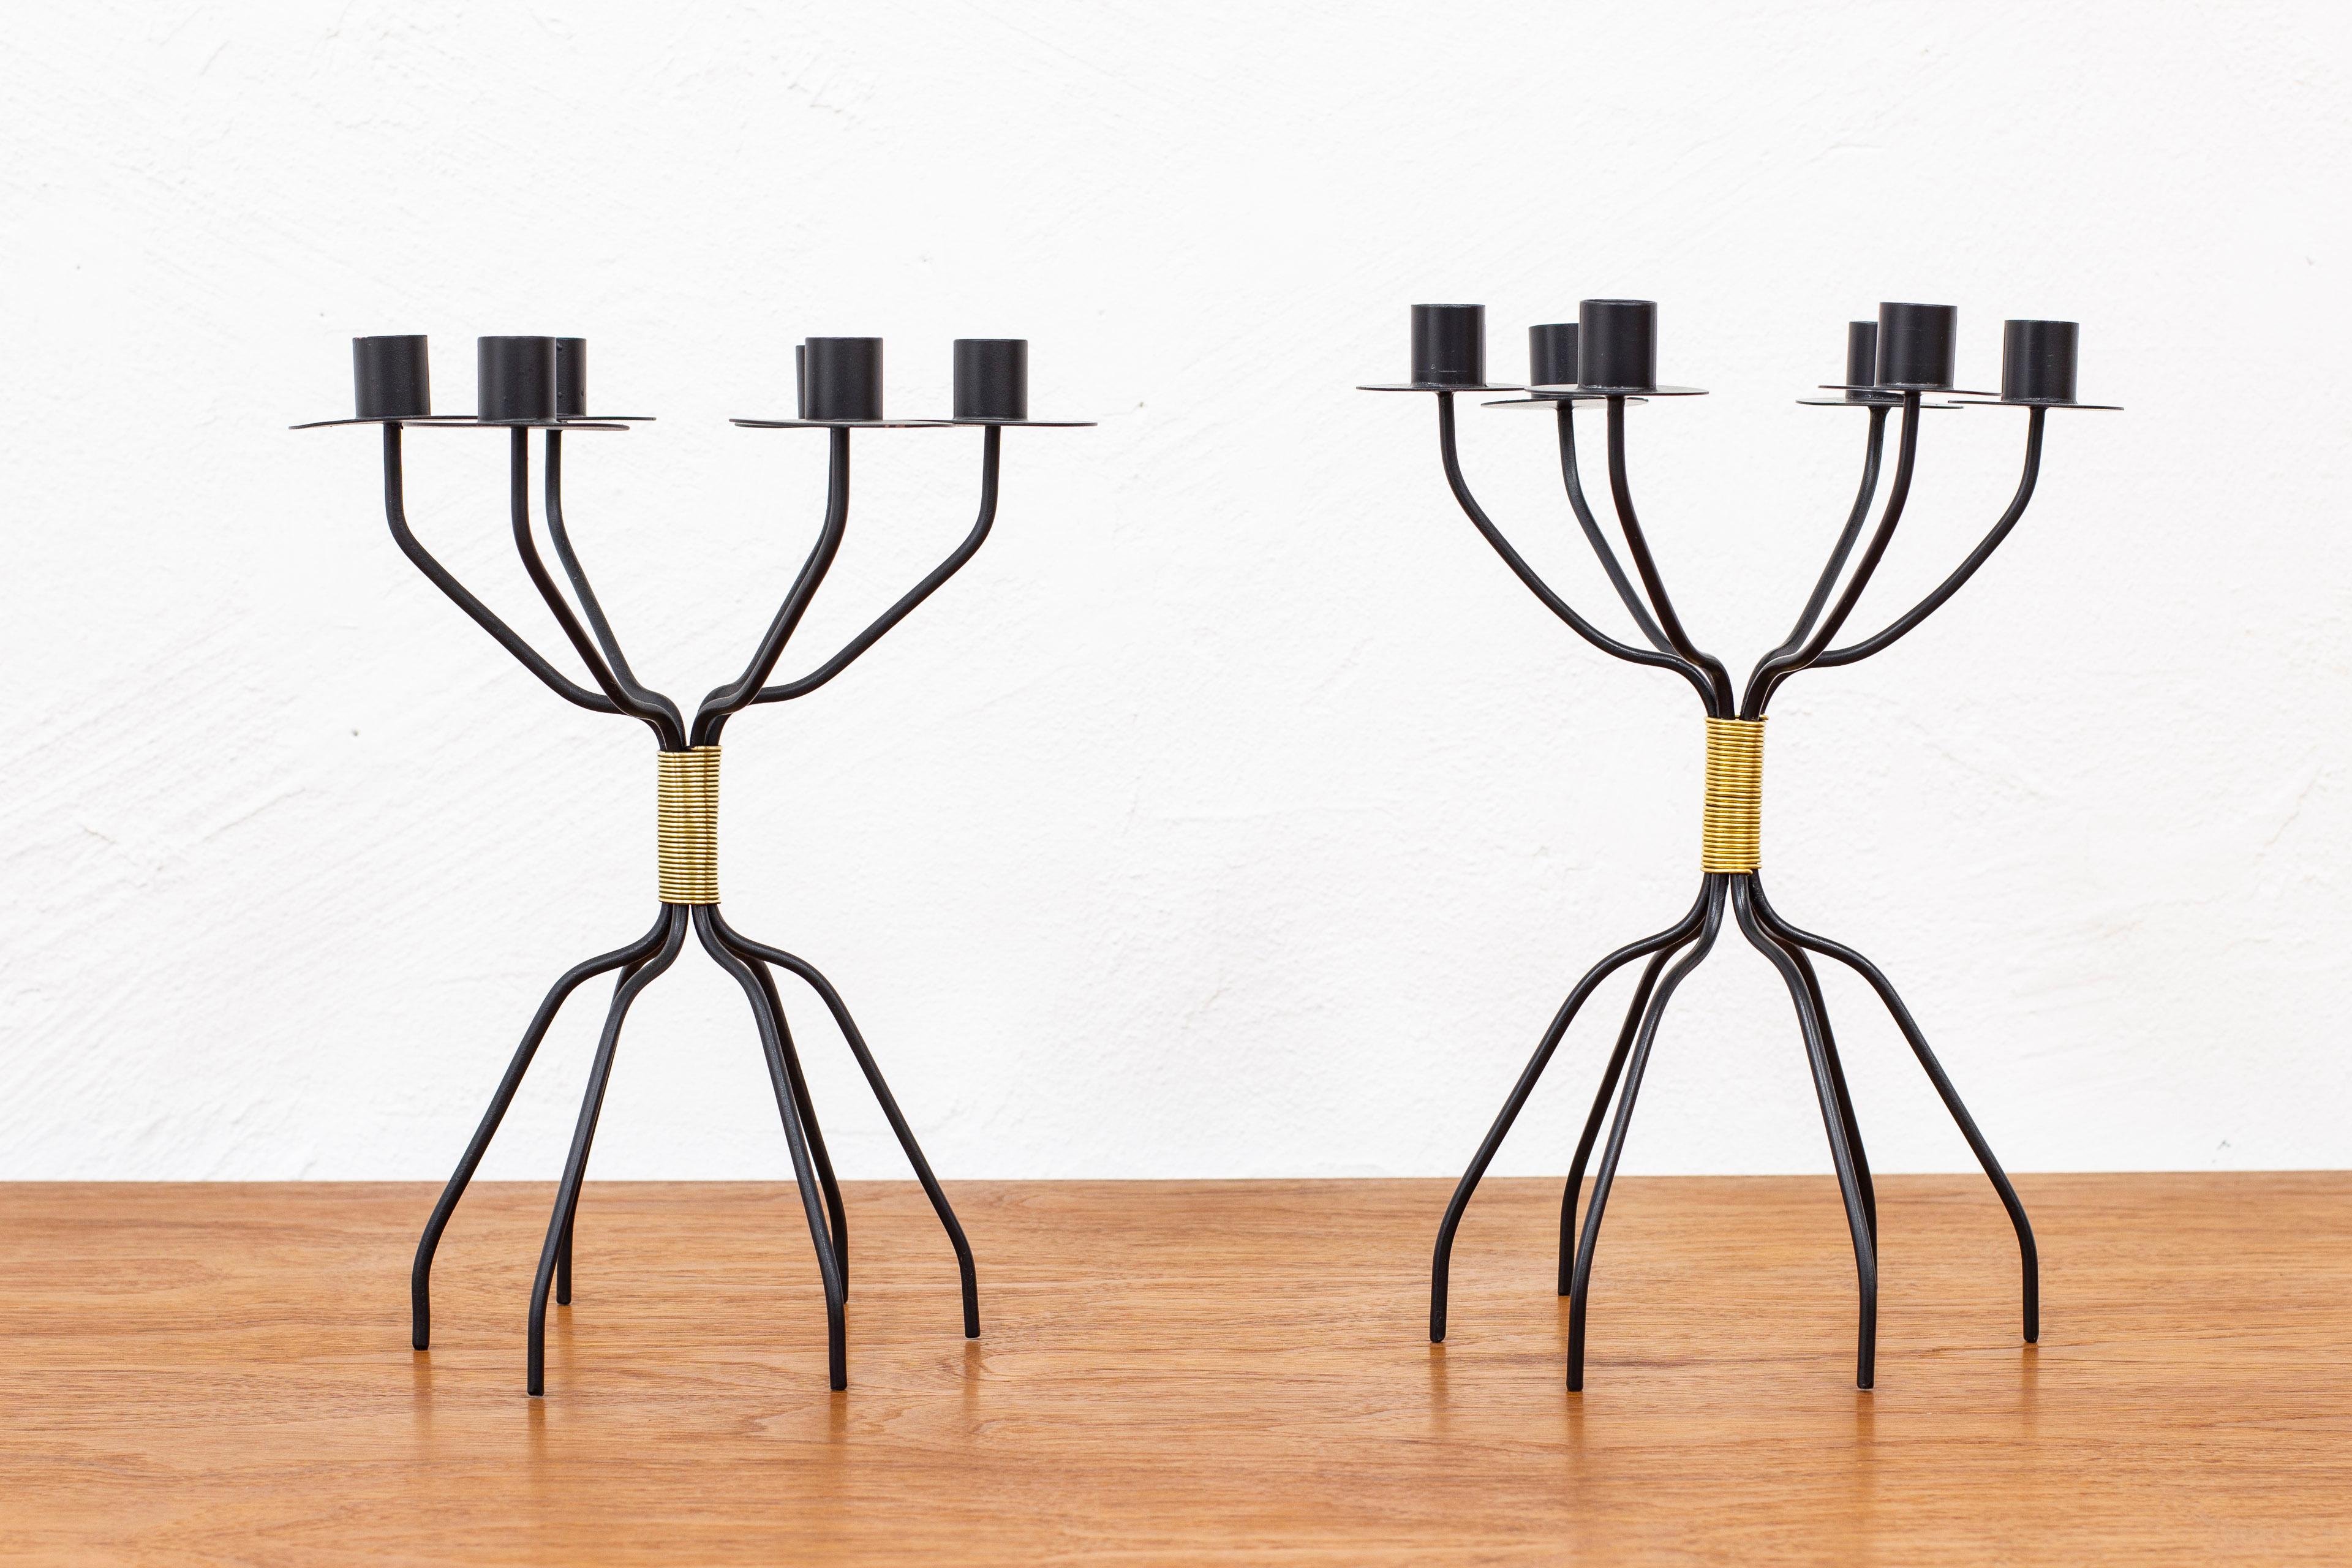 Pair of early and rare candelabras designed by Hans-Agne Jakobsson. Hand made in his first workshop in Åhus, Sweden during the early 1950s. Made from black lacquered metal and brass wire. Both candelabras Have six candle holders and legs but vary